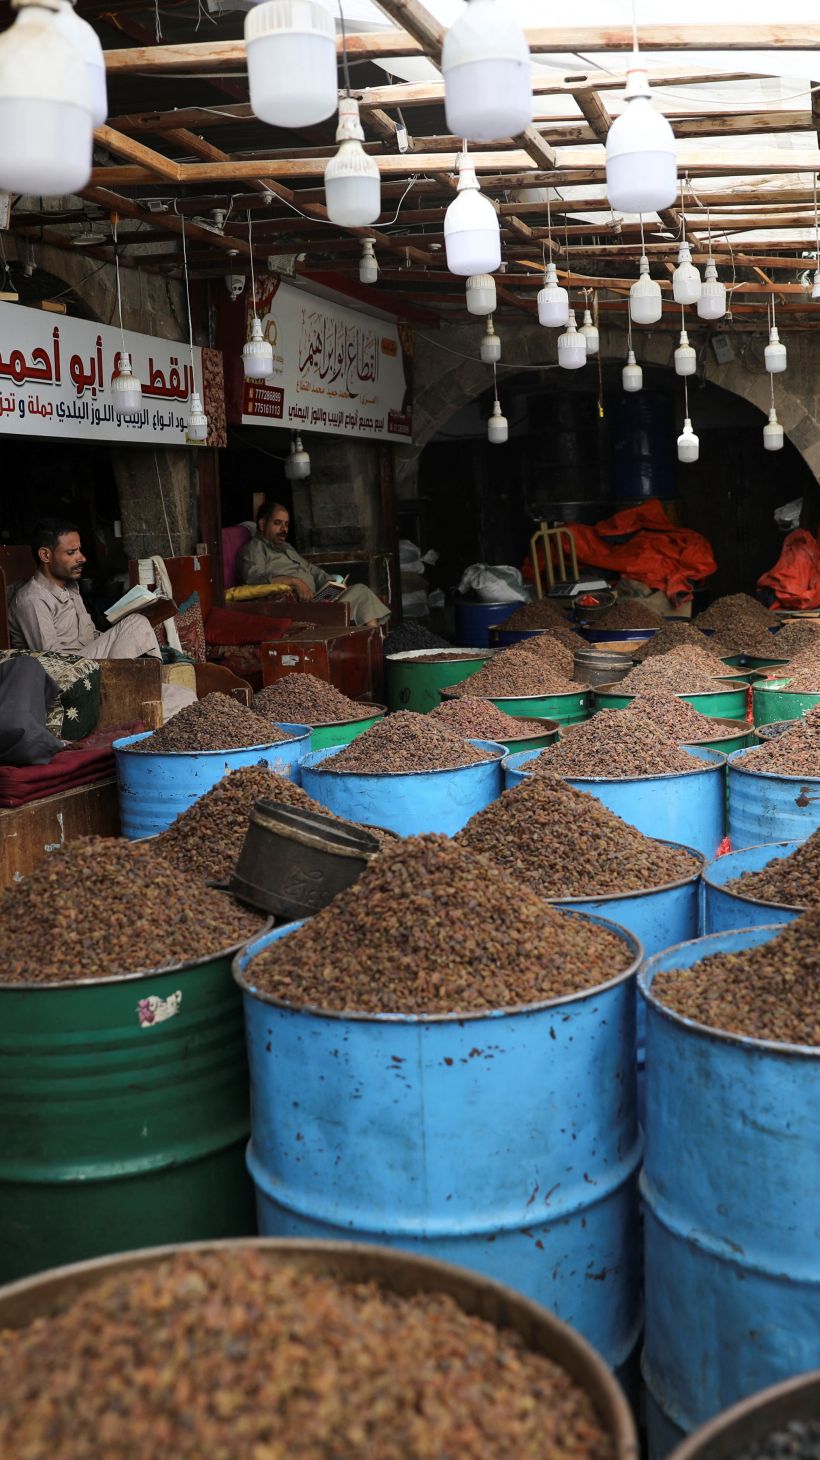 A photo of a market with barrels of raisins and people sitting in chairs behind the barrels.